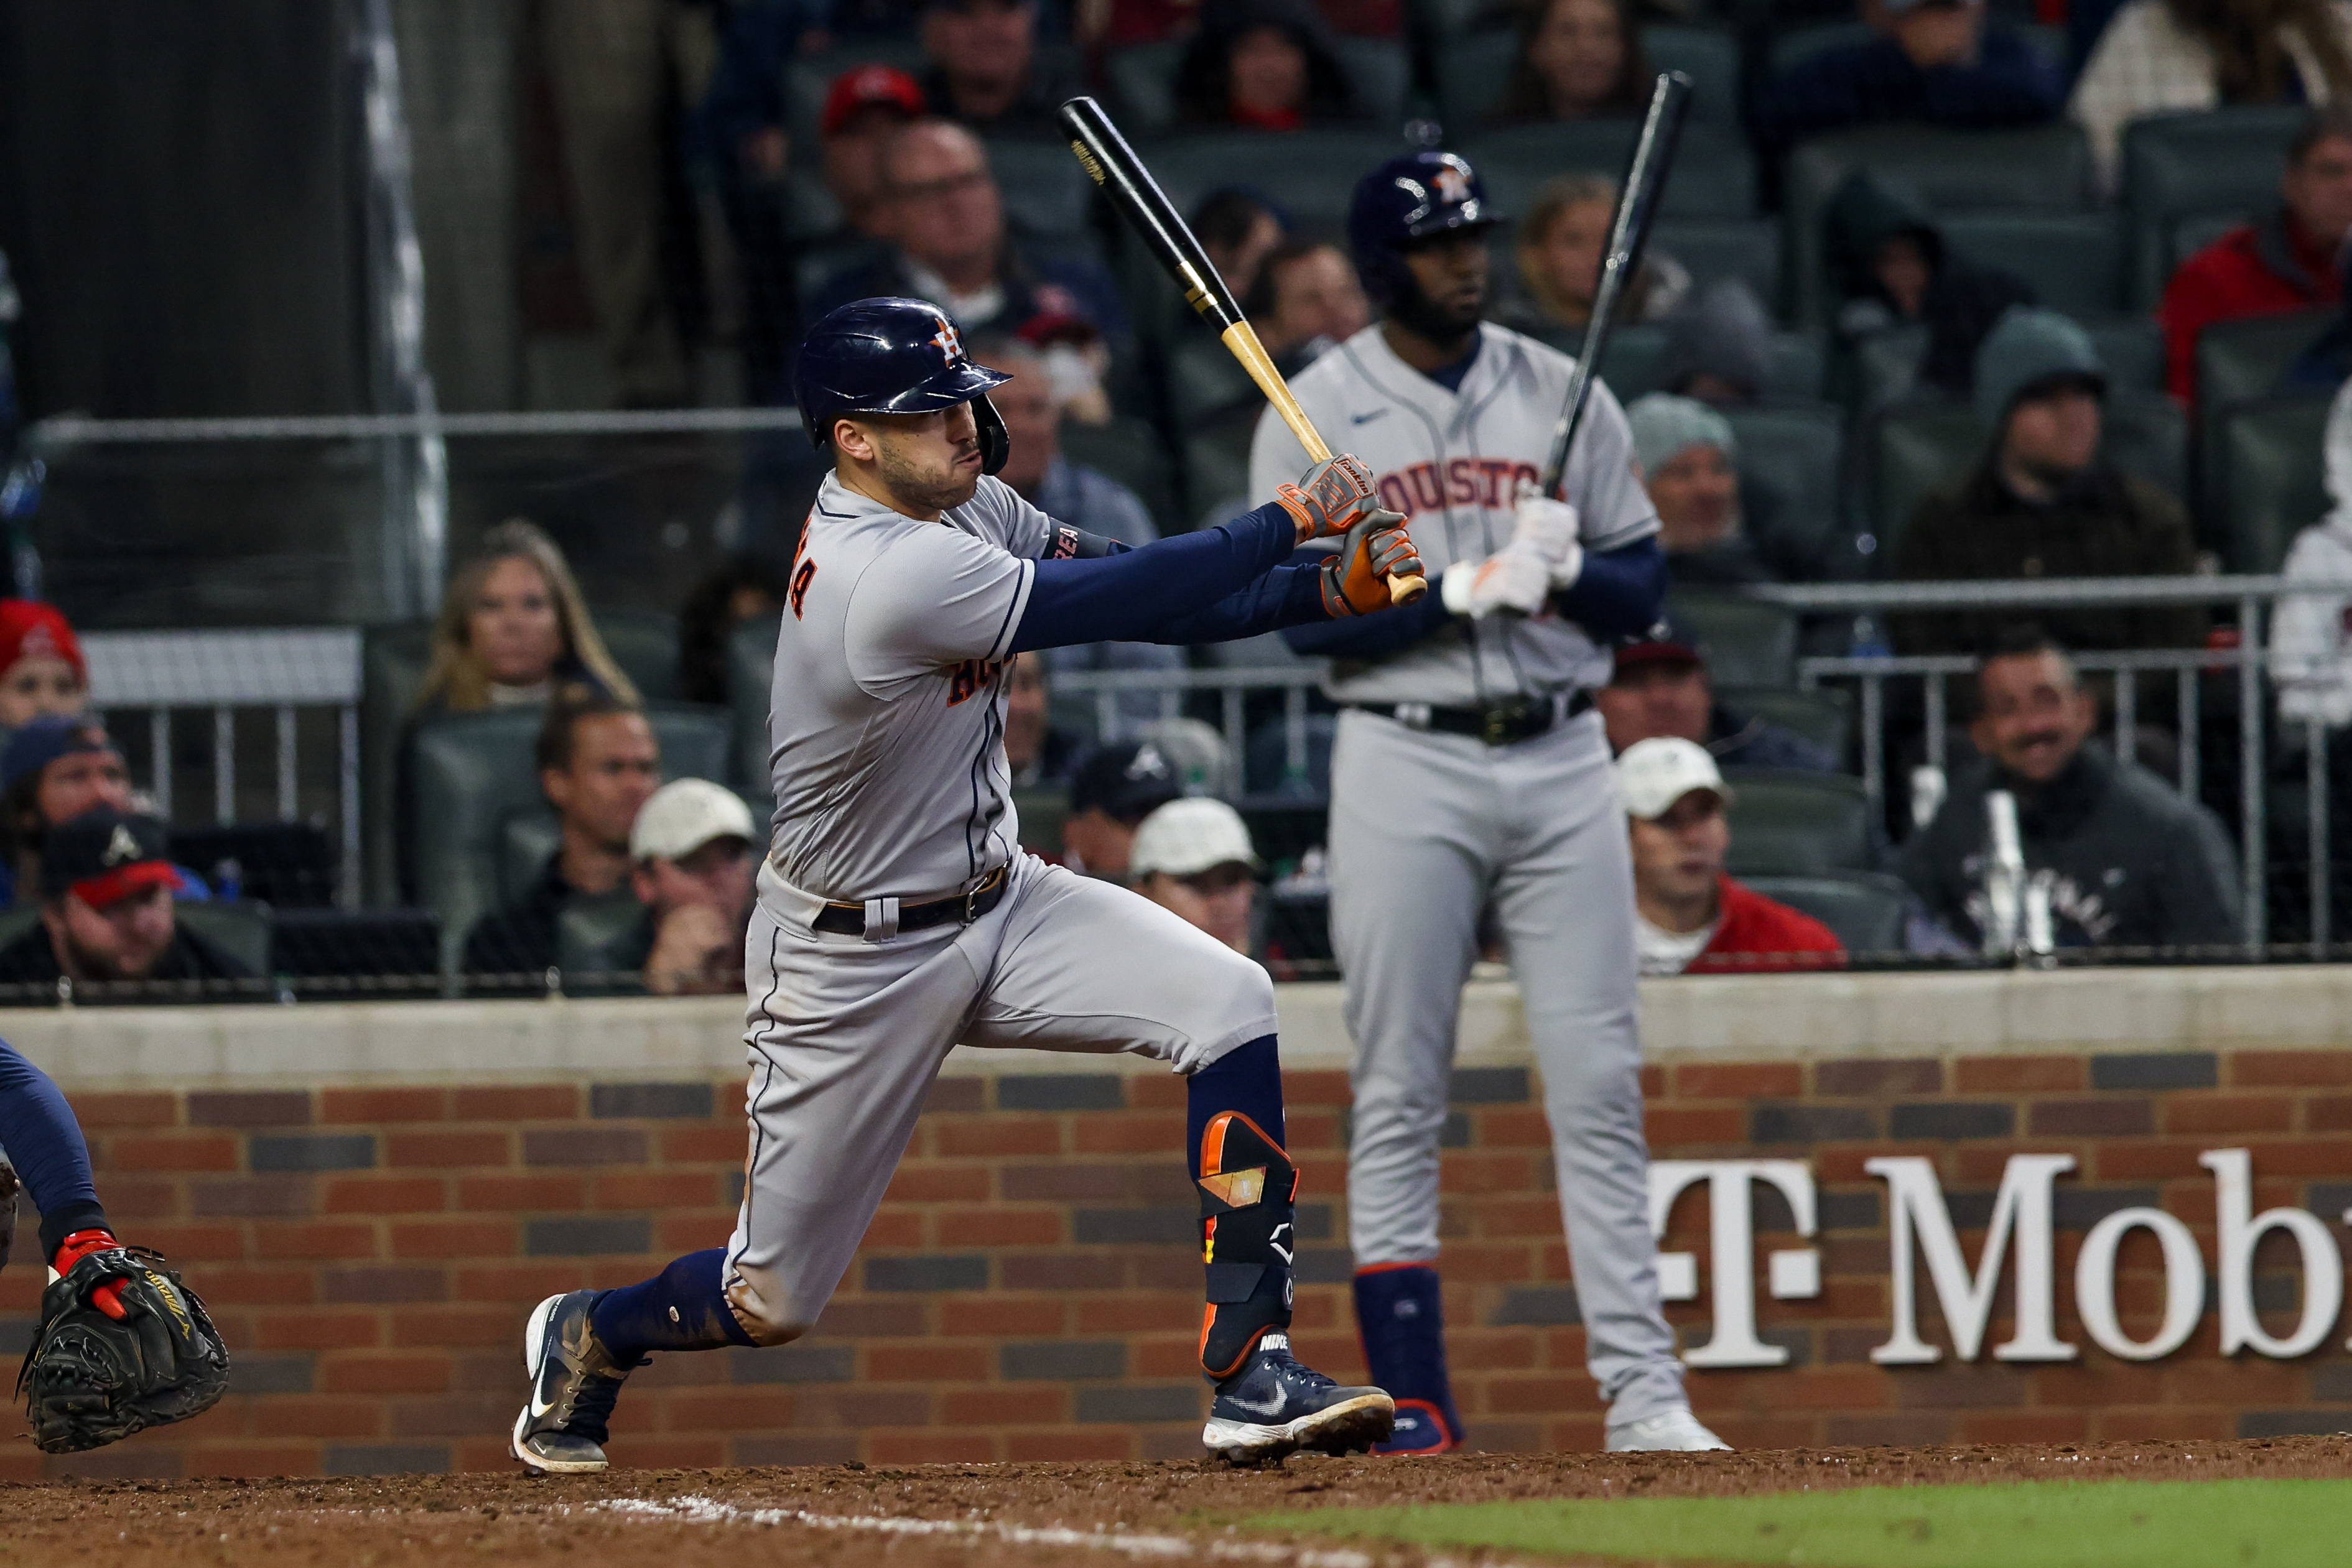 Carlos Correa #1 of the Houston Astros hits a RBI single in the eighth inning during Game 5 of the 2021 World Series between the Houston Astros and the Atlanta Braves at Truist Park on Sunday, October 31, 2021 in Atlanta, Georgia.